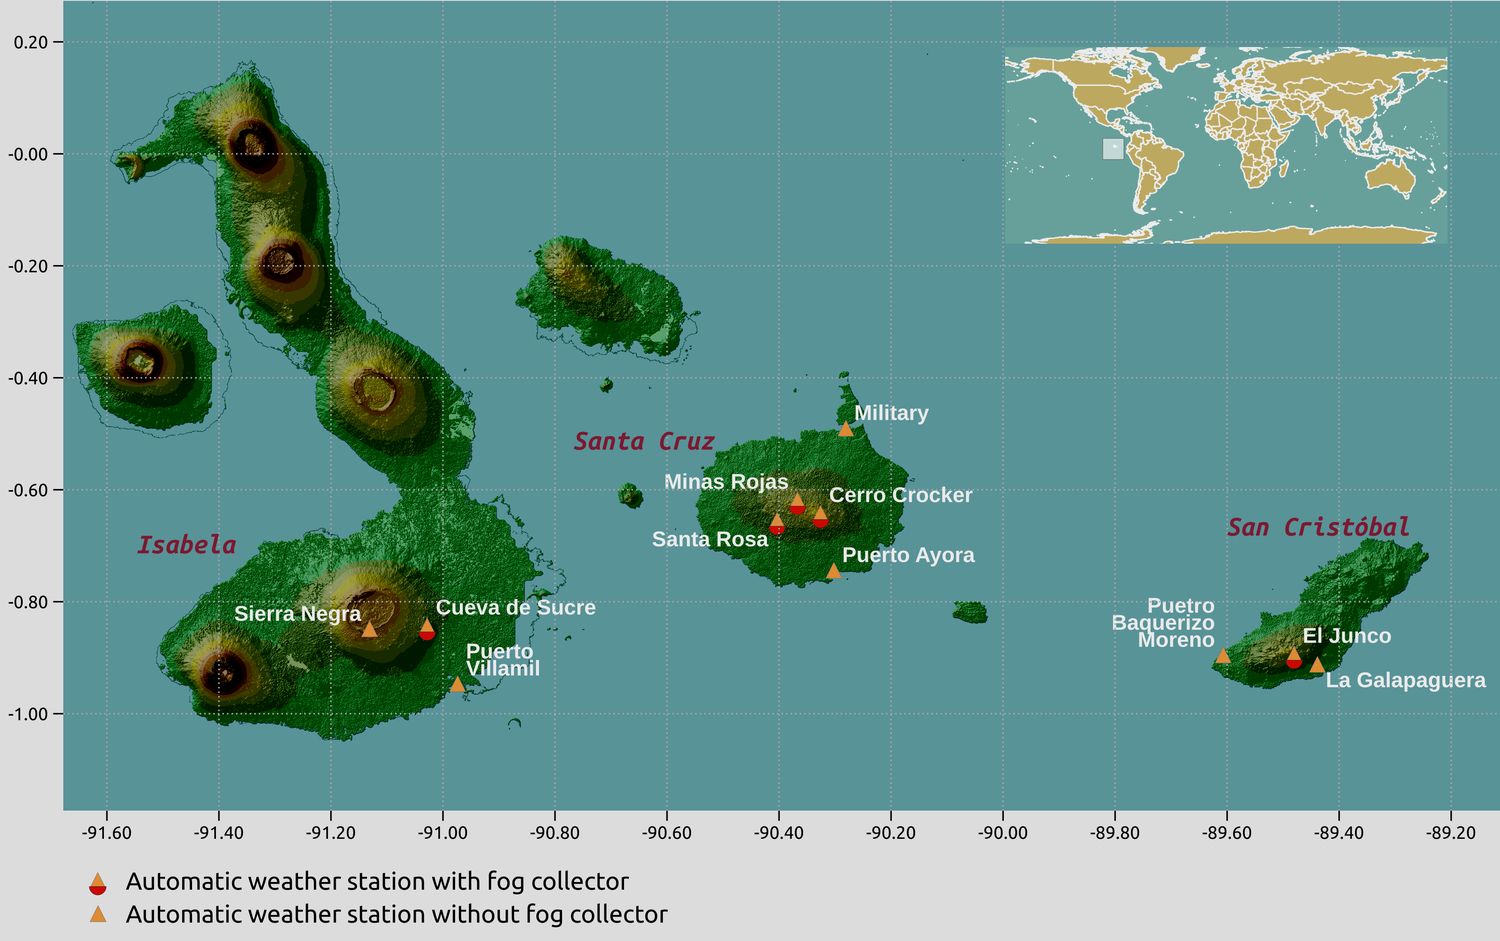 Map of automatic weather stations on galapagos islands